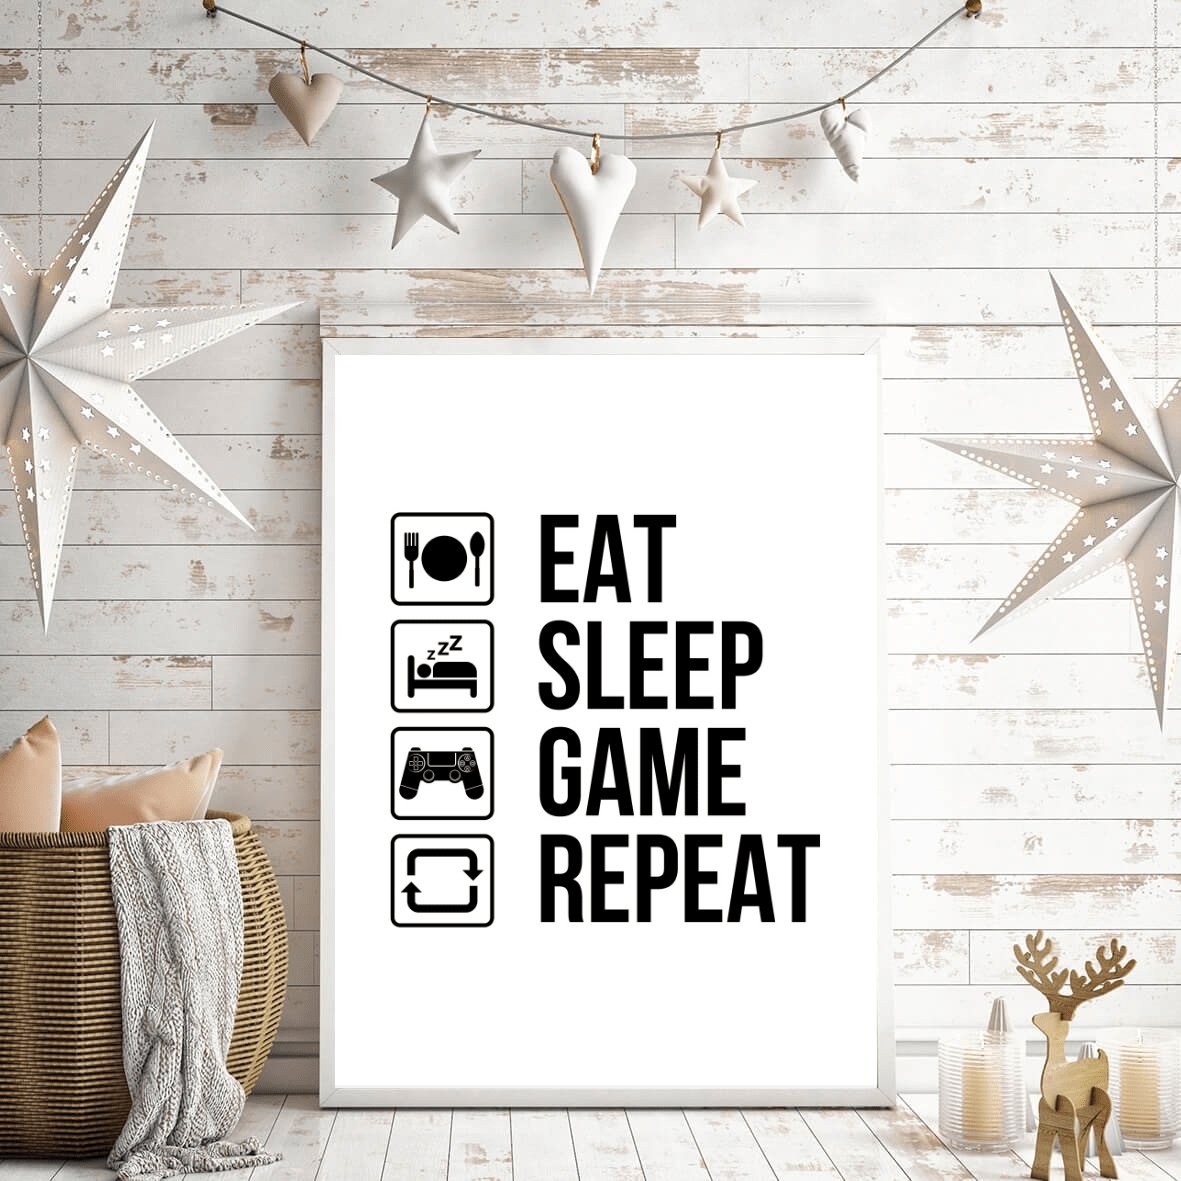 Game Eat Repeat – Sleep poster